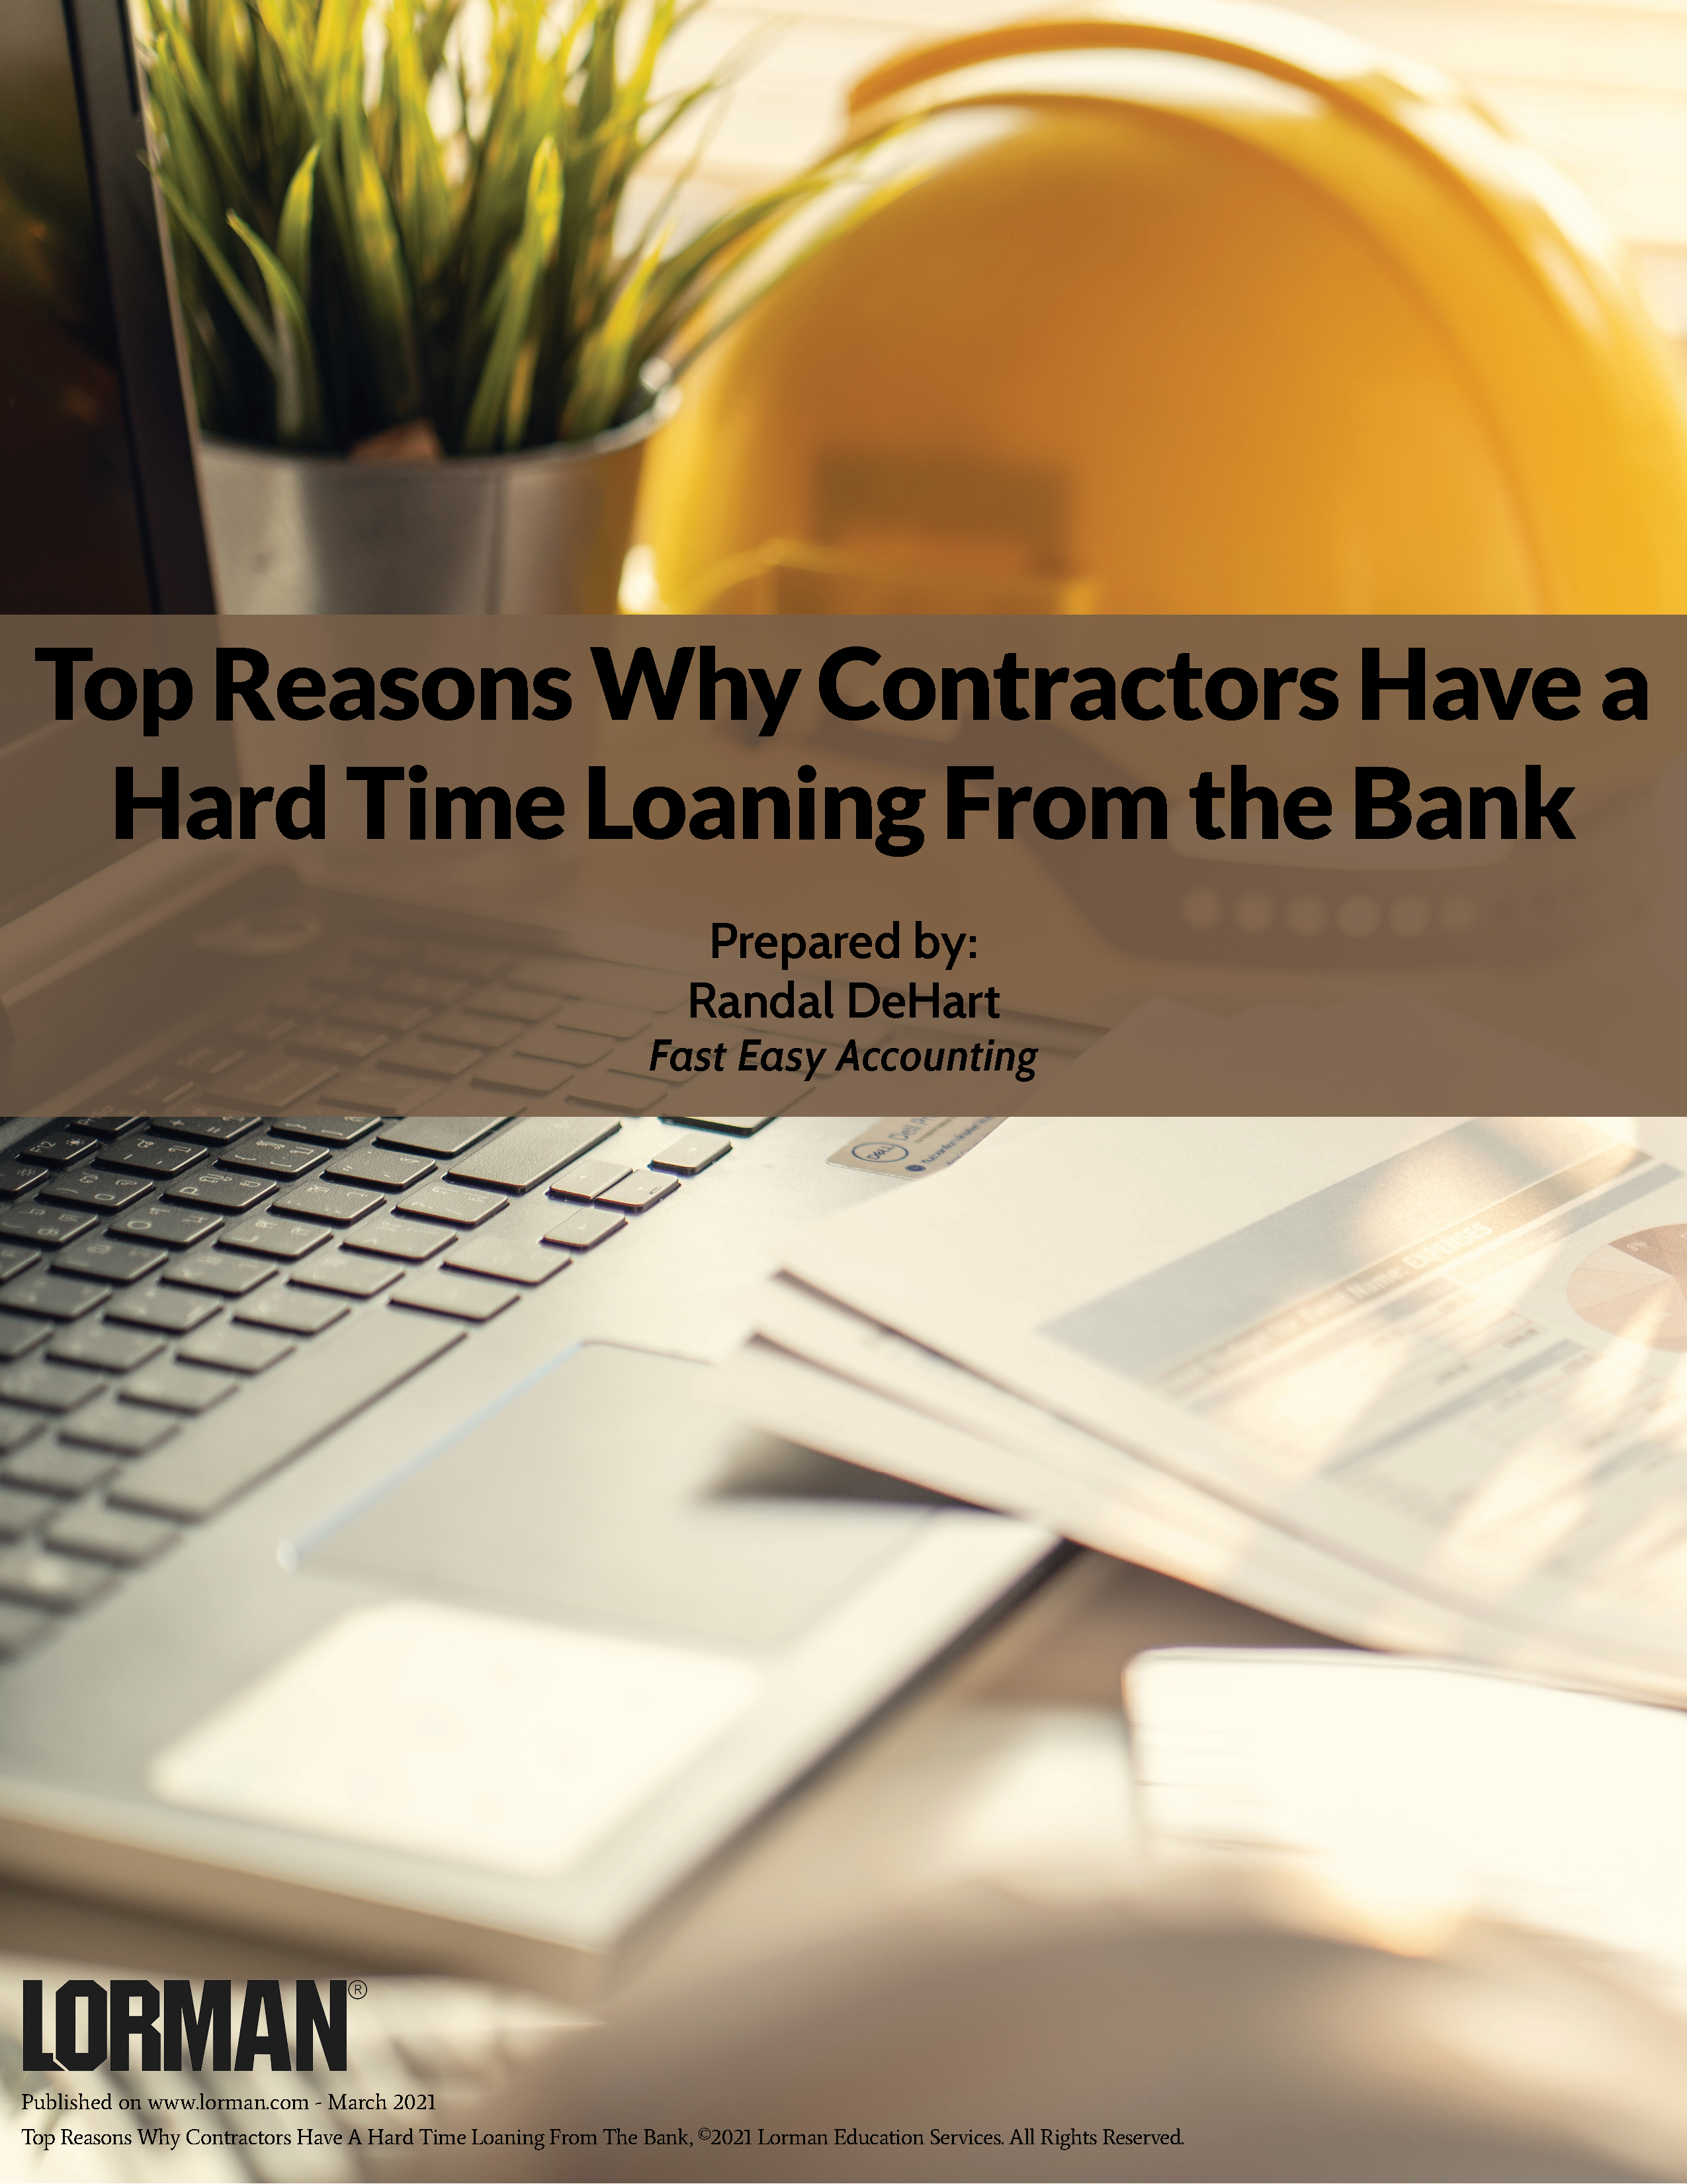 Top Reasons Why Contractors Have a Hard Time Loaning From the Bank